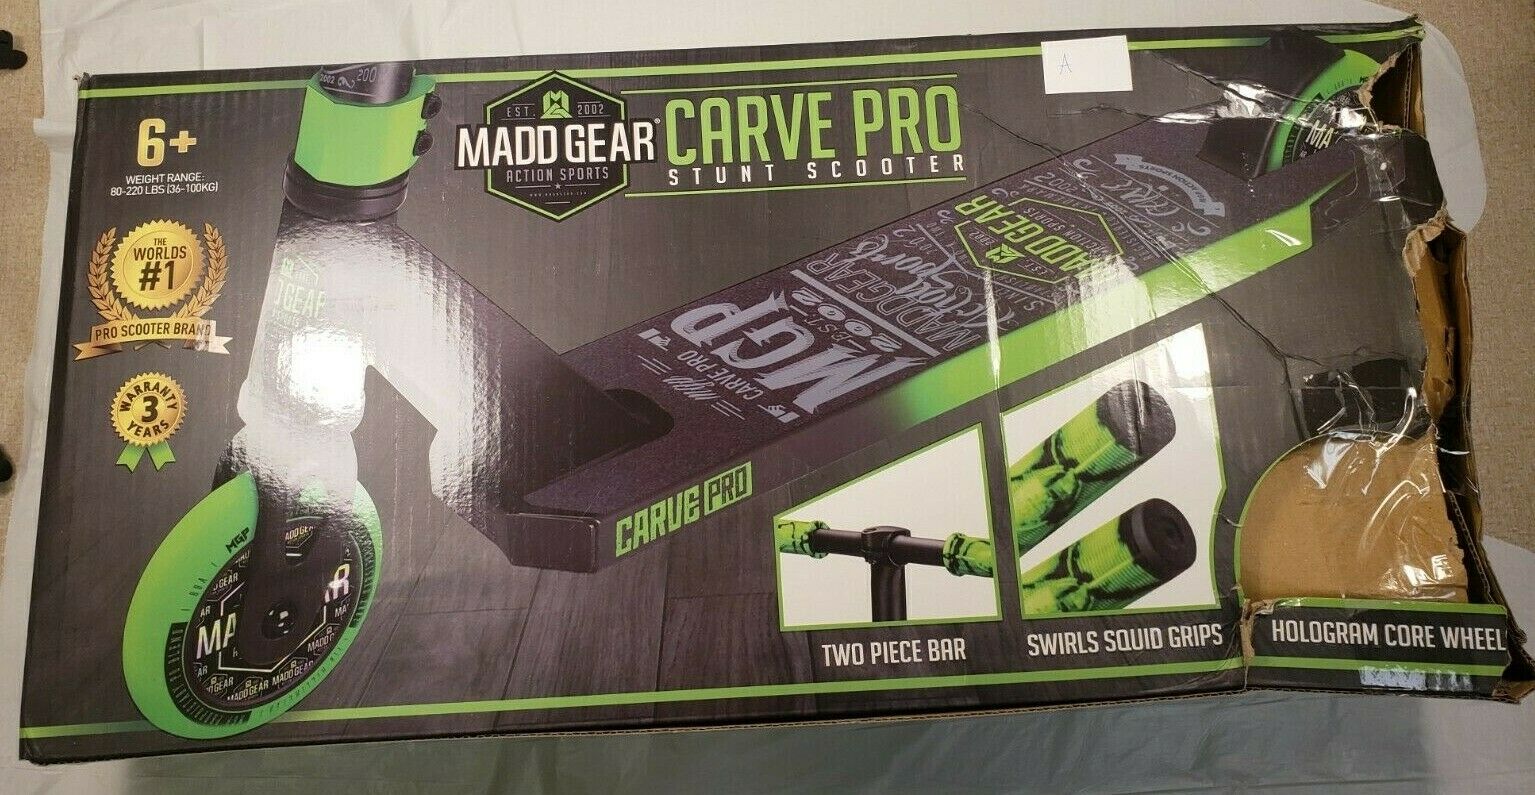 Madd Gear Action Sports Carve Pro Stunt Scooter 205-495, Black/Green GA